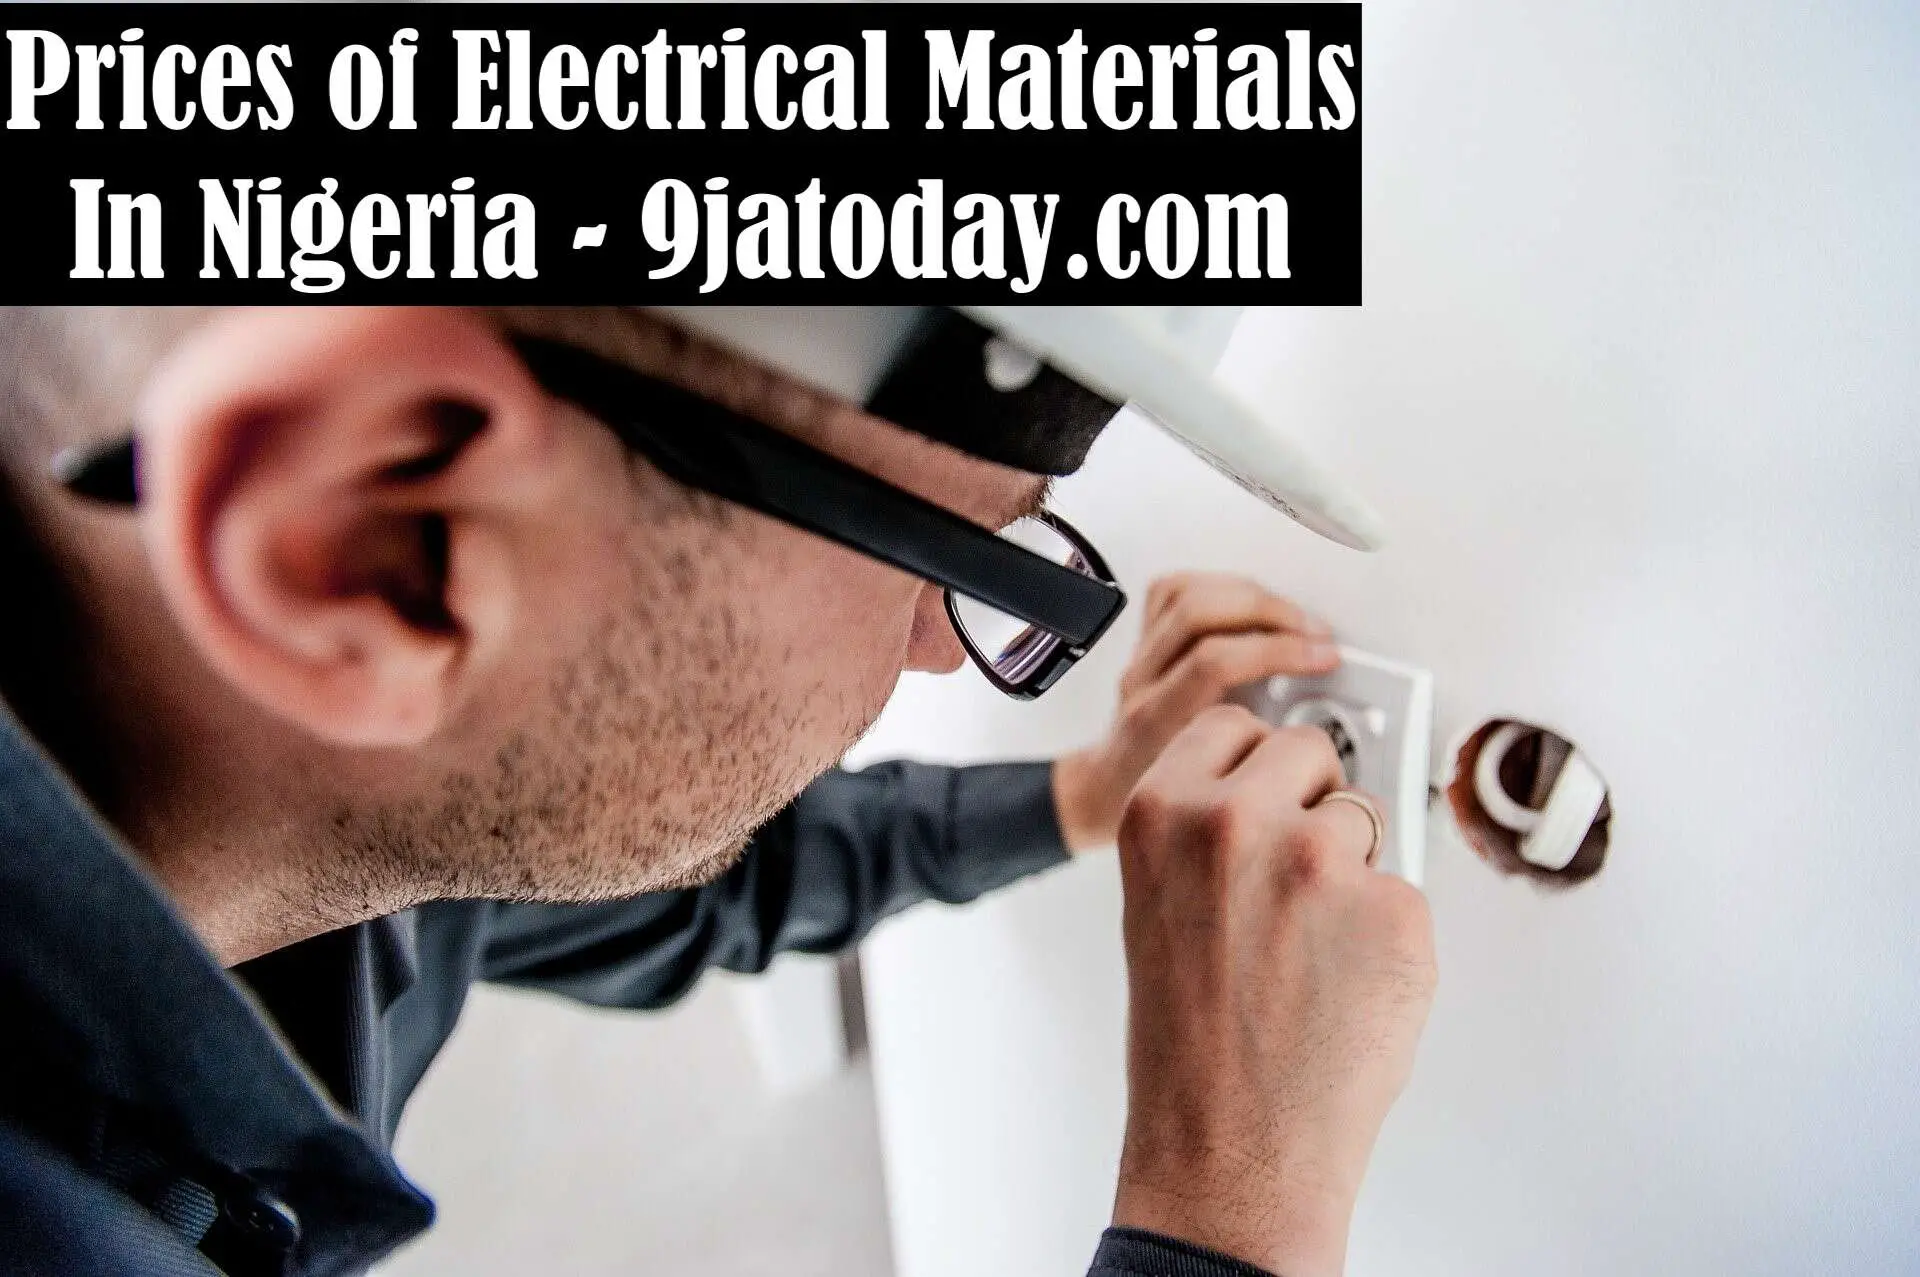 Prices of Electrical Materials In Nigeria